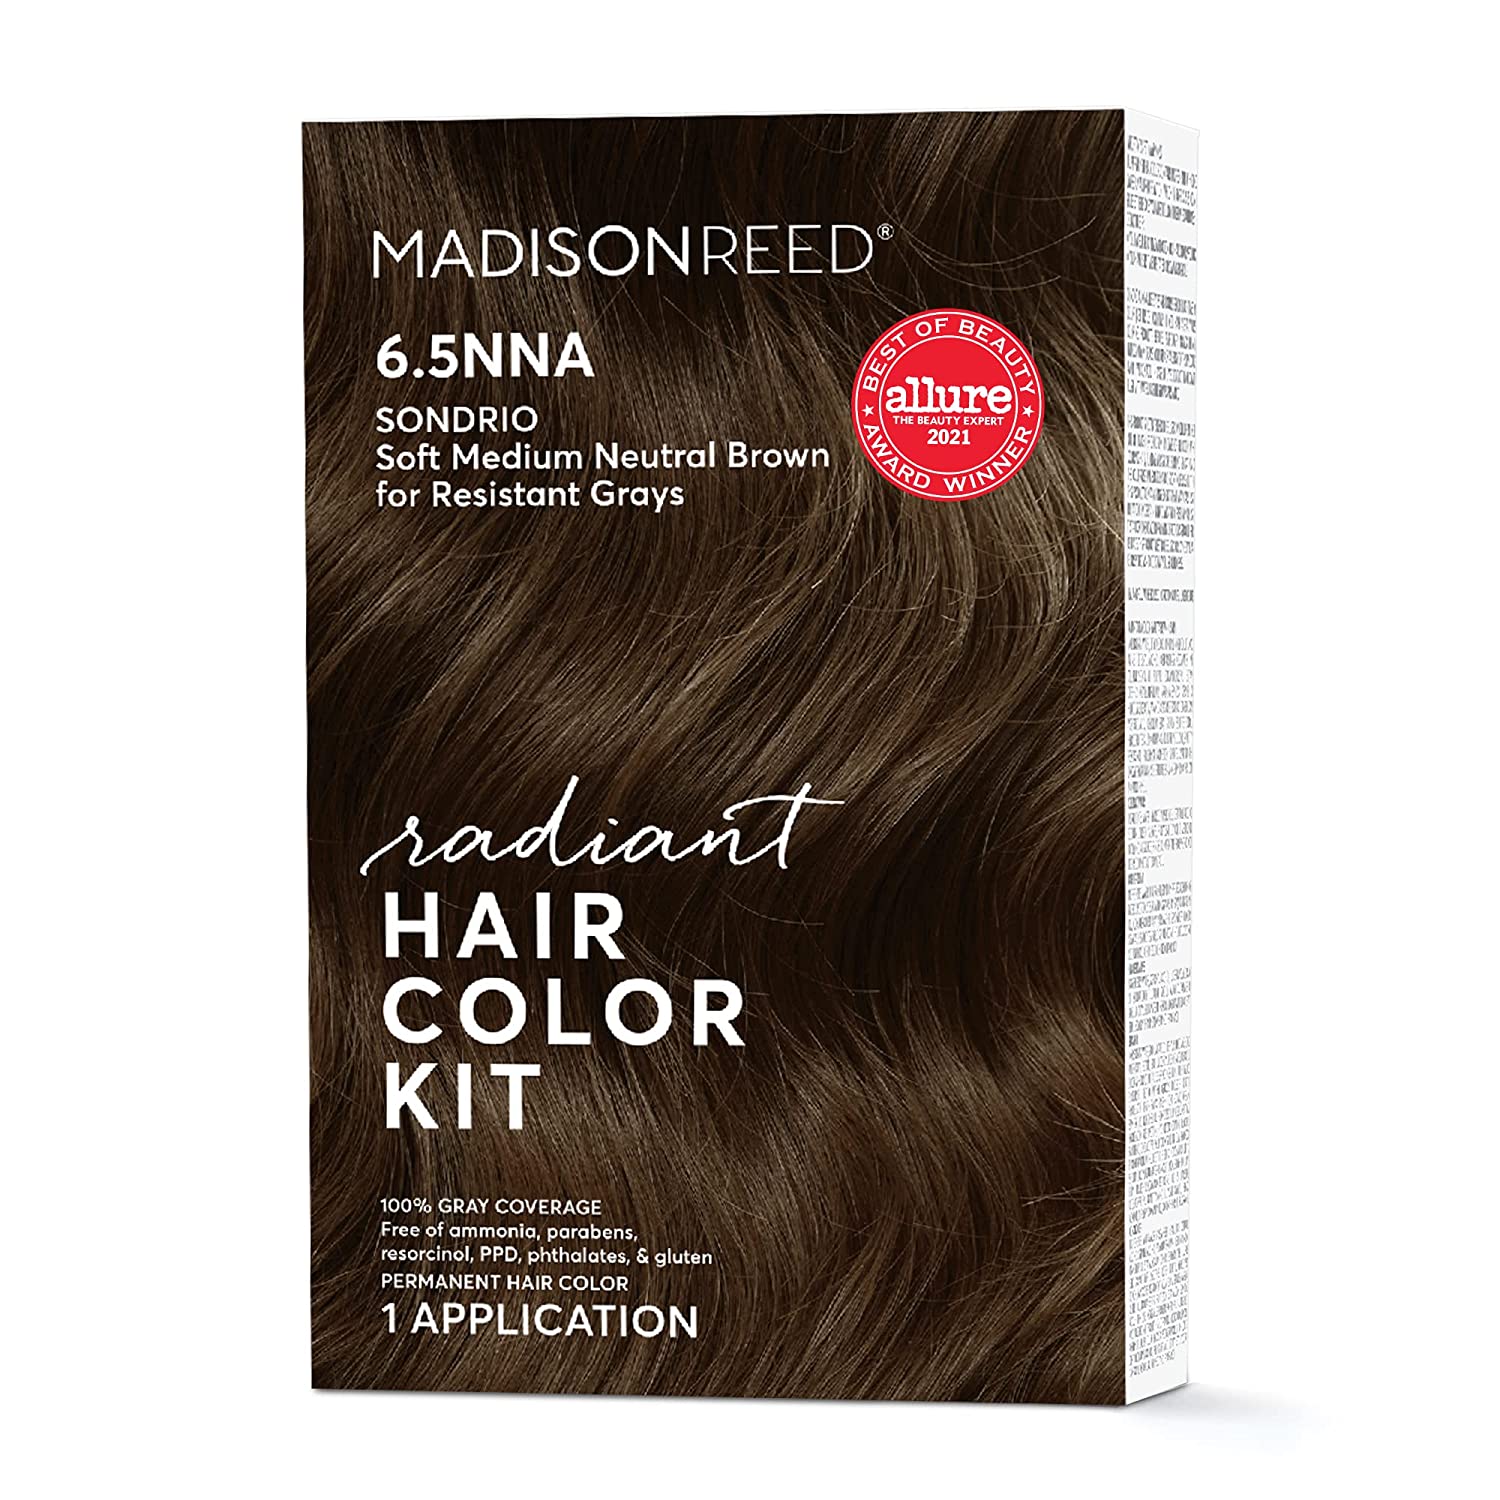  5. Madison Reed Radiant Hair Color Kit is the best color choice. 